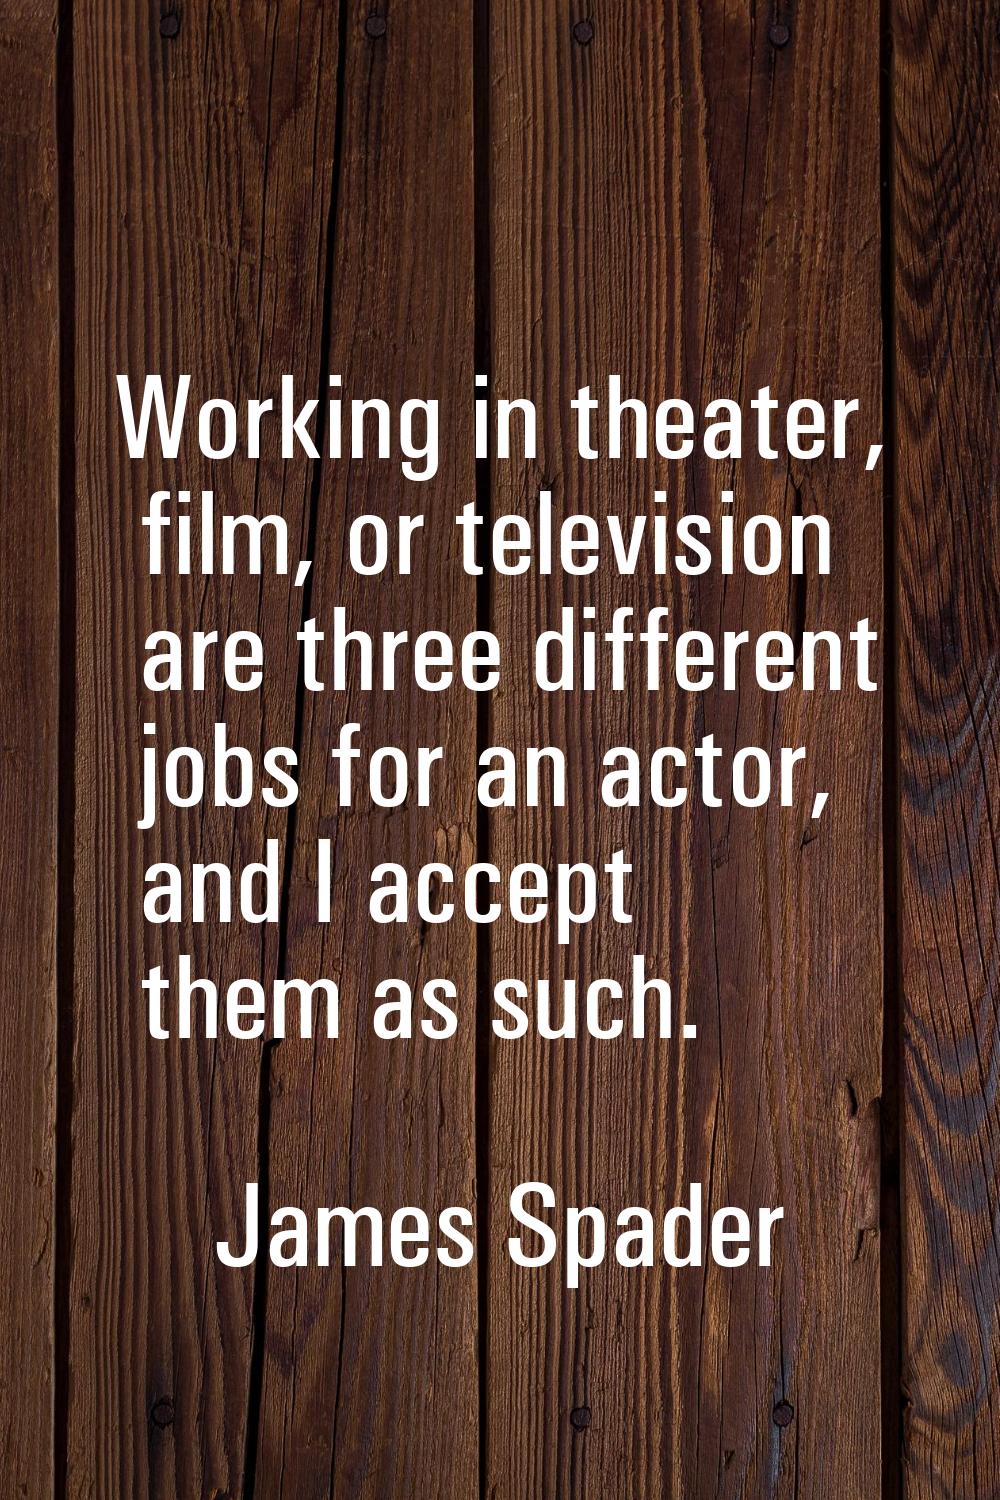 Working in theater, film, or television are three different jobs for an actor, and I accept them as